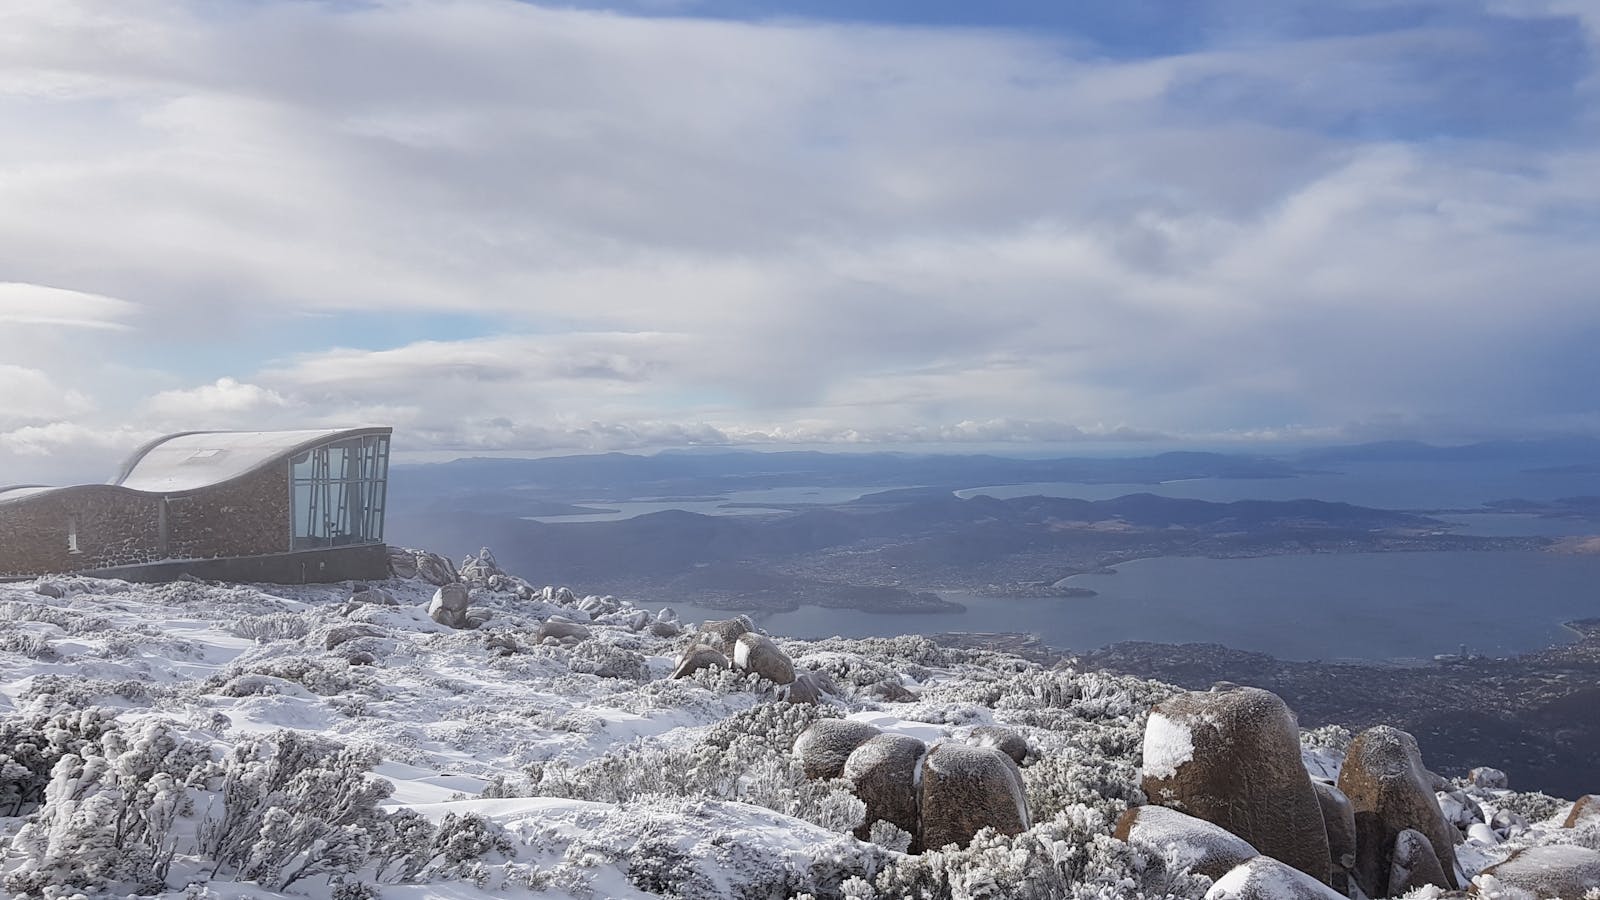 Exclusive access to kunanyi/Mt Wellington when Pinnacle Road is closed due to snow.